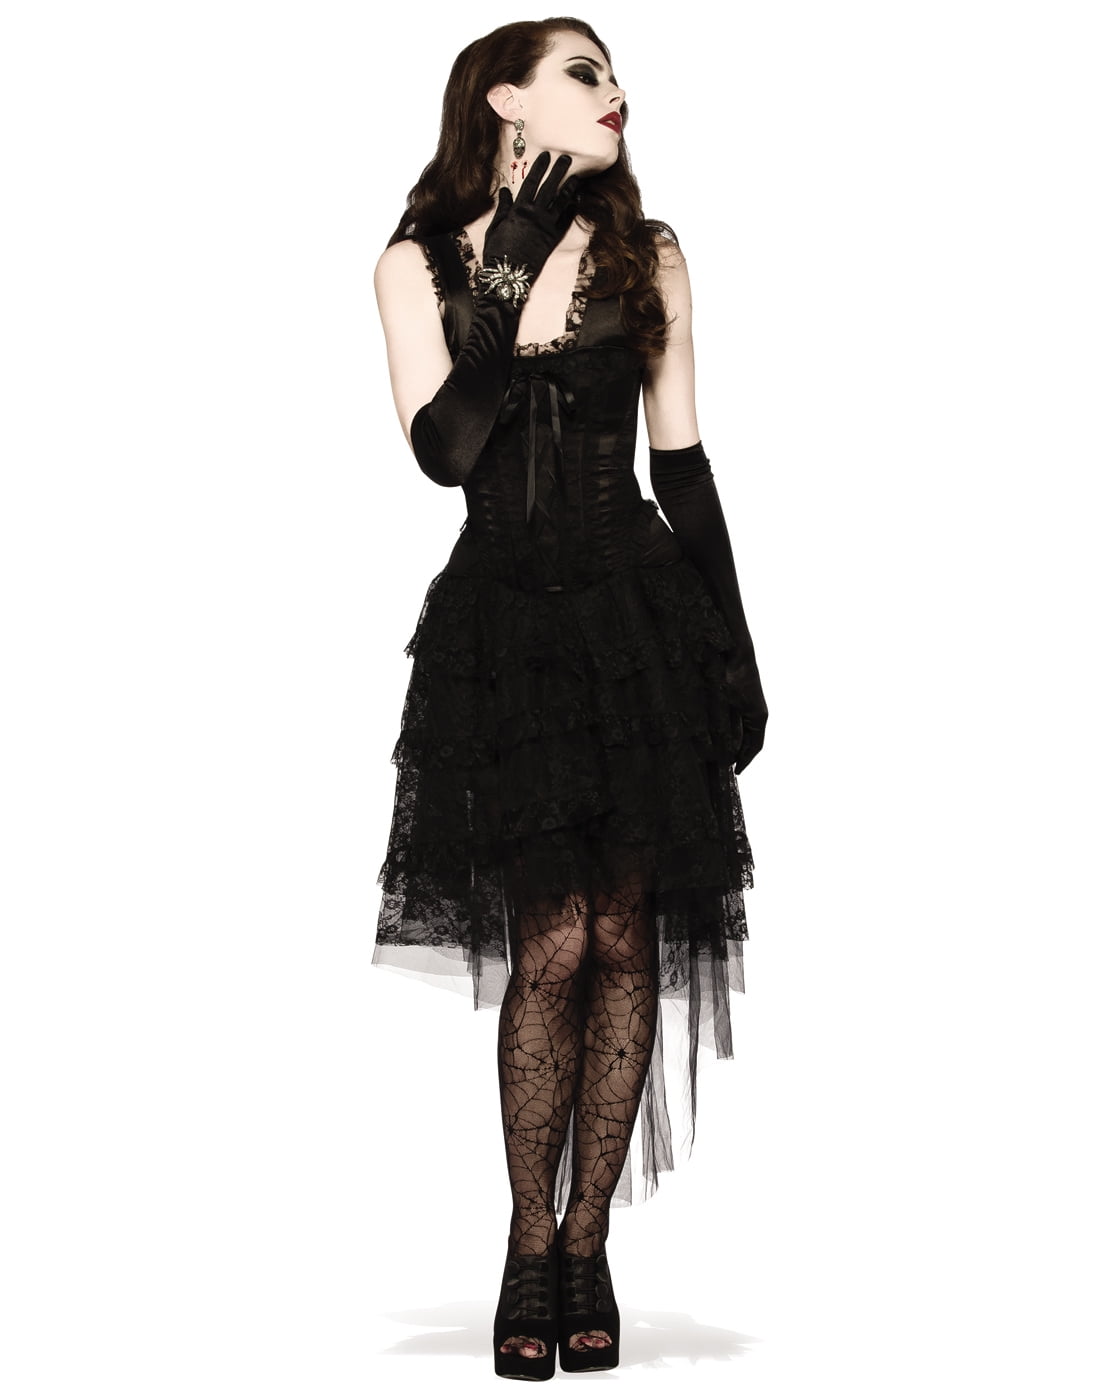 halloween costume with a black dress